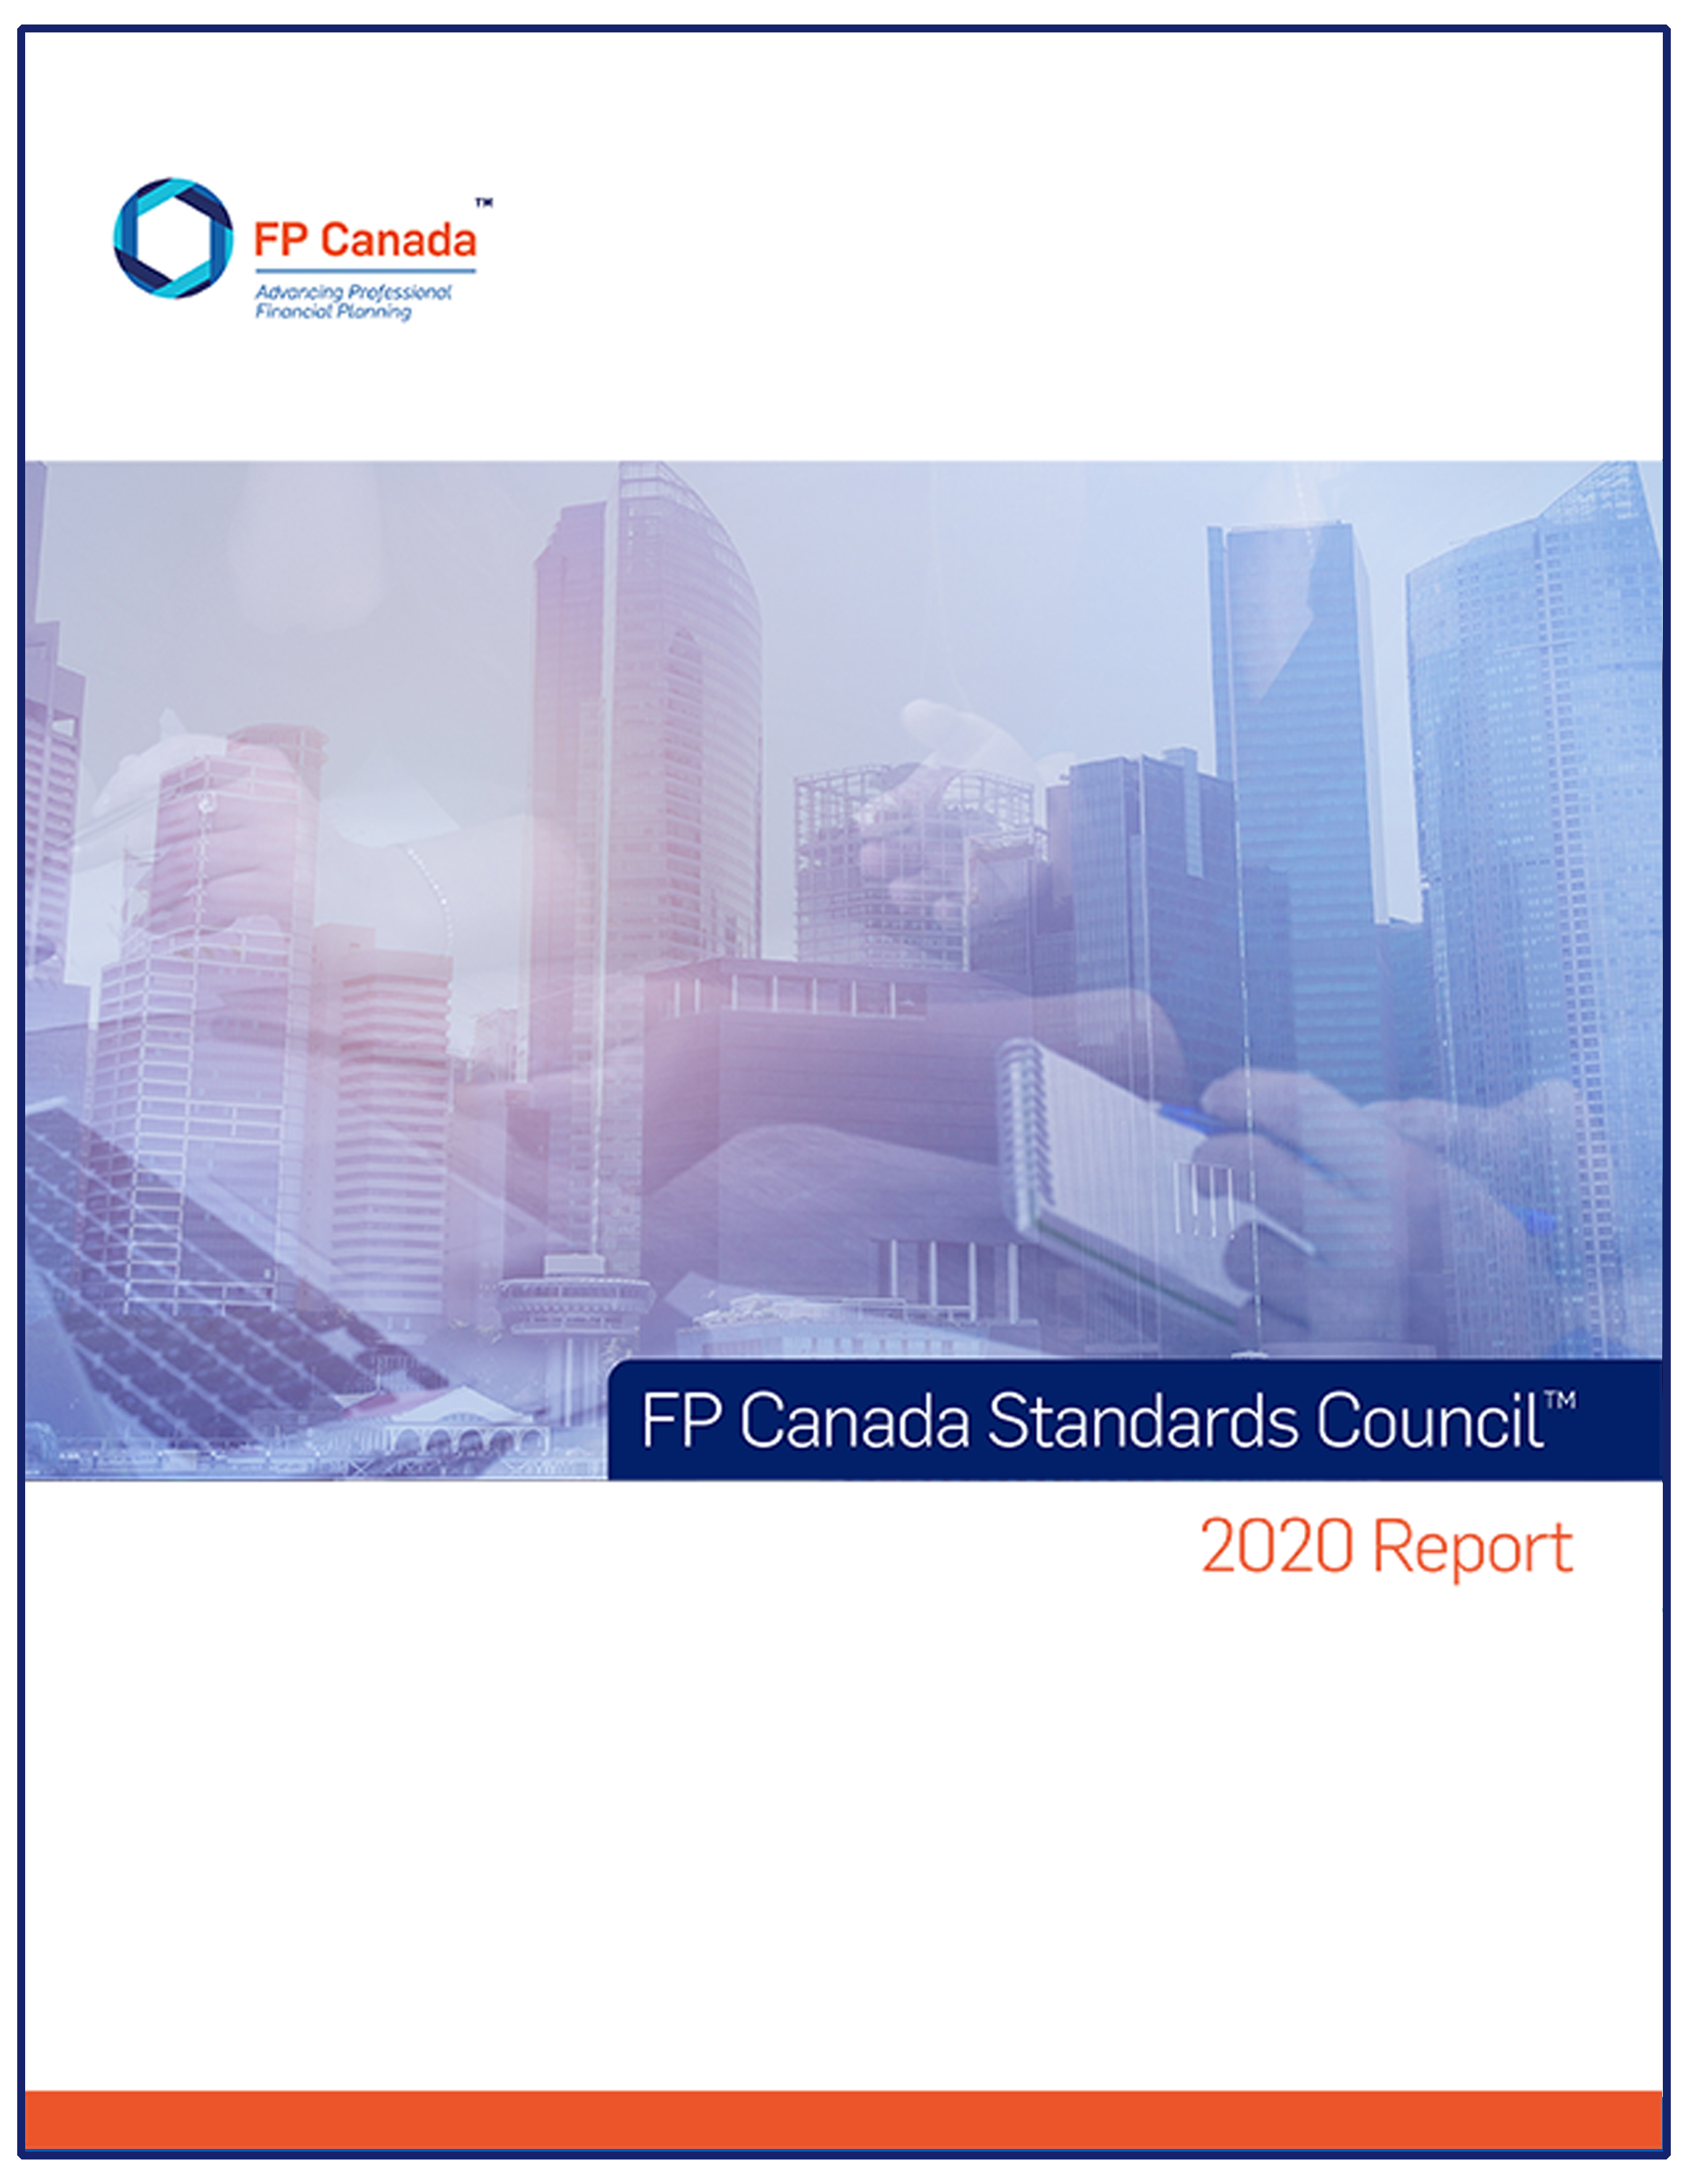 Standards Council Report. Click to read.